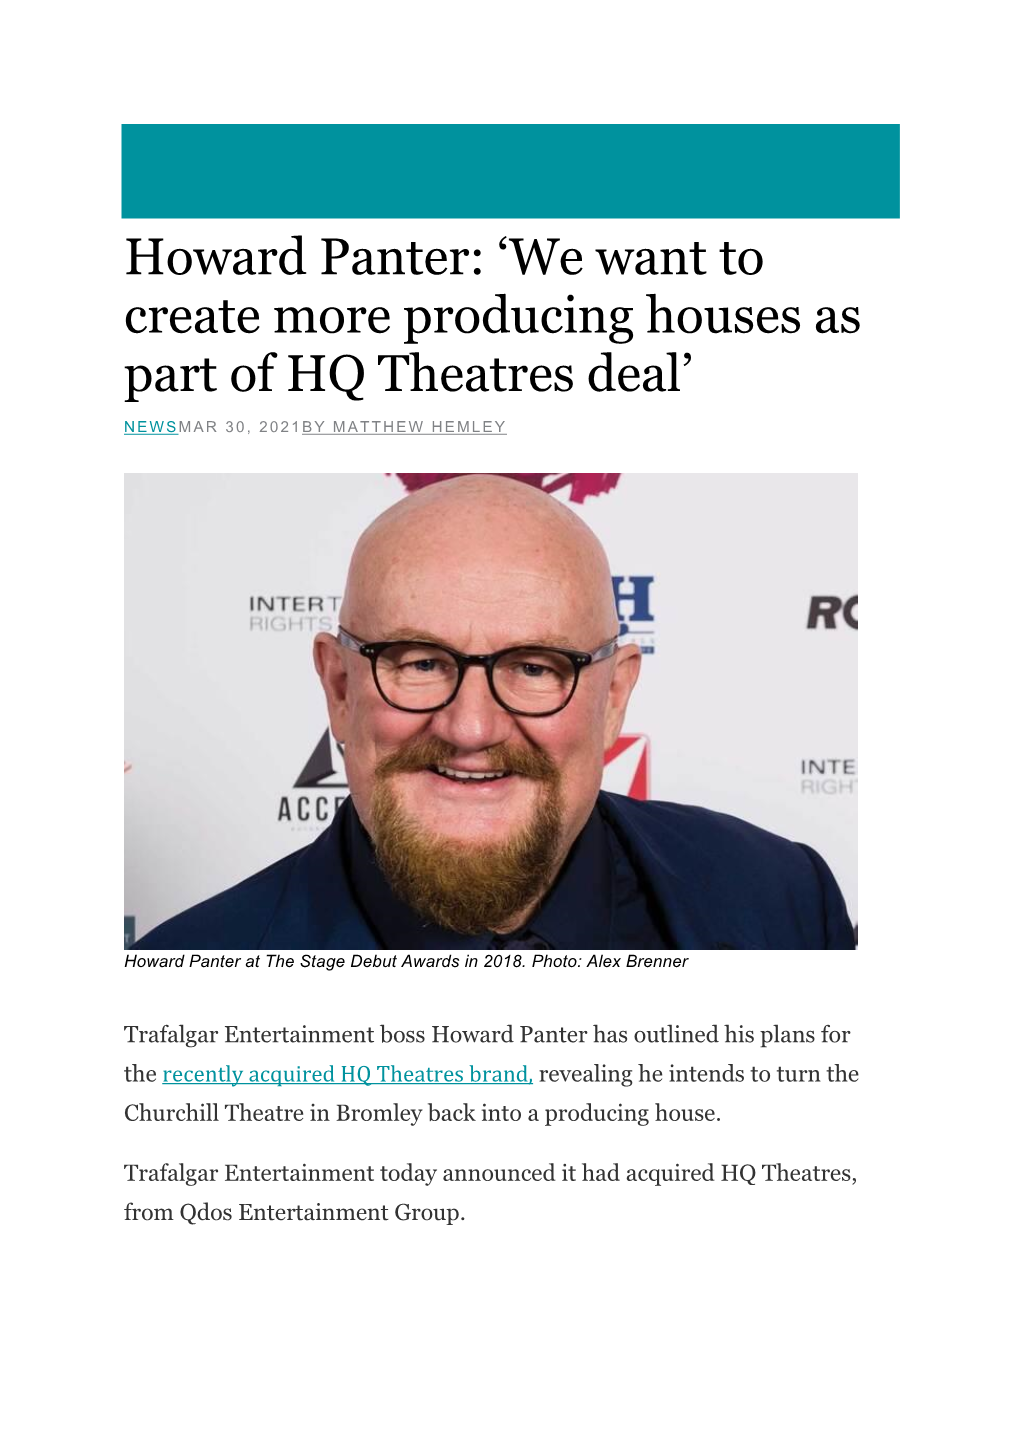 Howard Panter: ‘We Want to Create More Producing Houses As Part of HQ Theatres Deal’